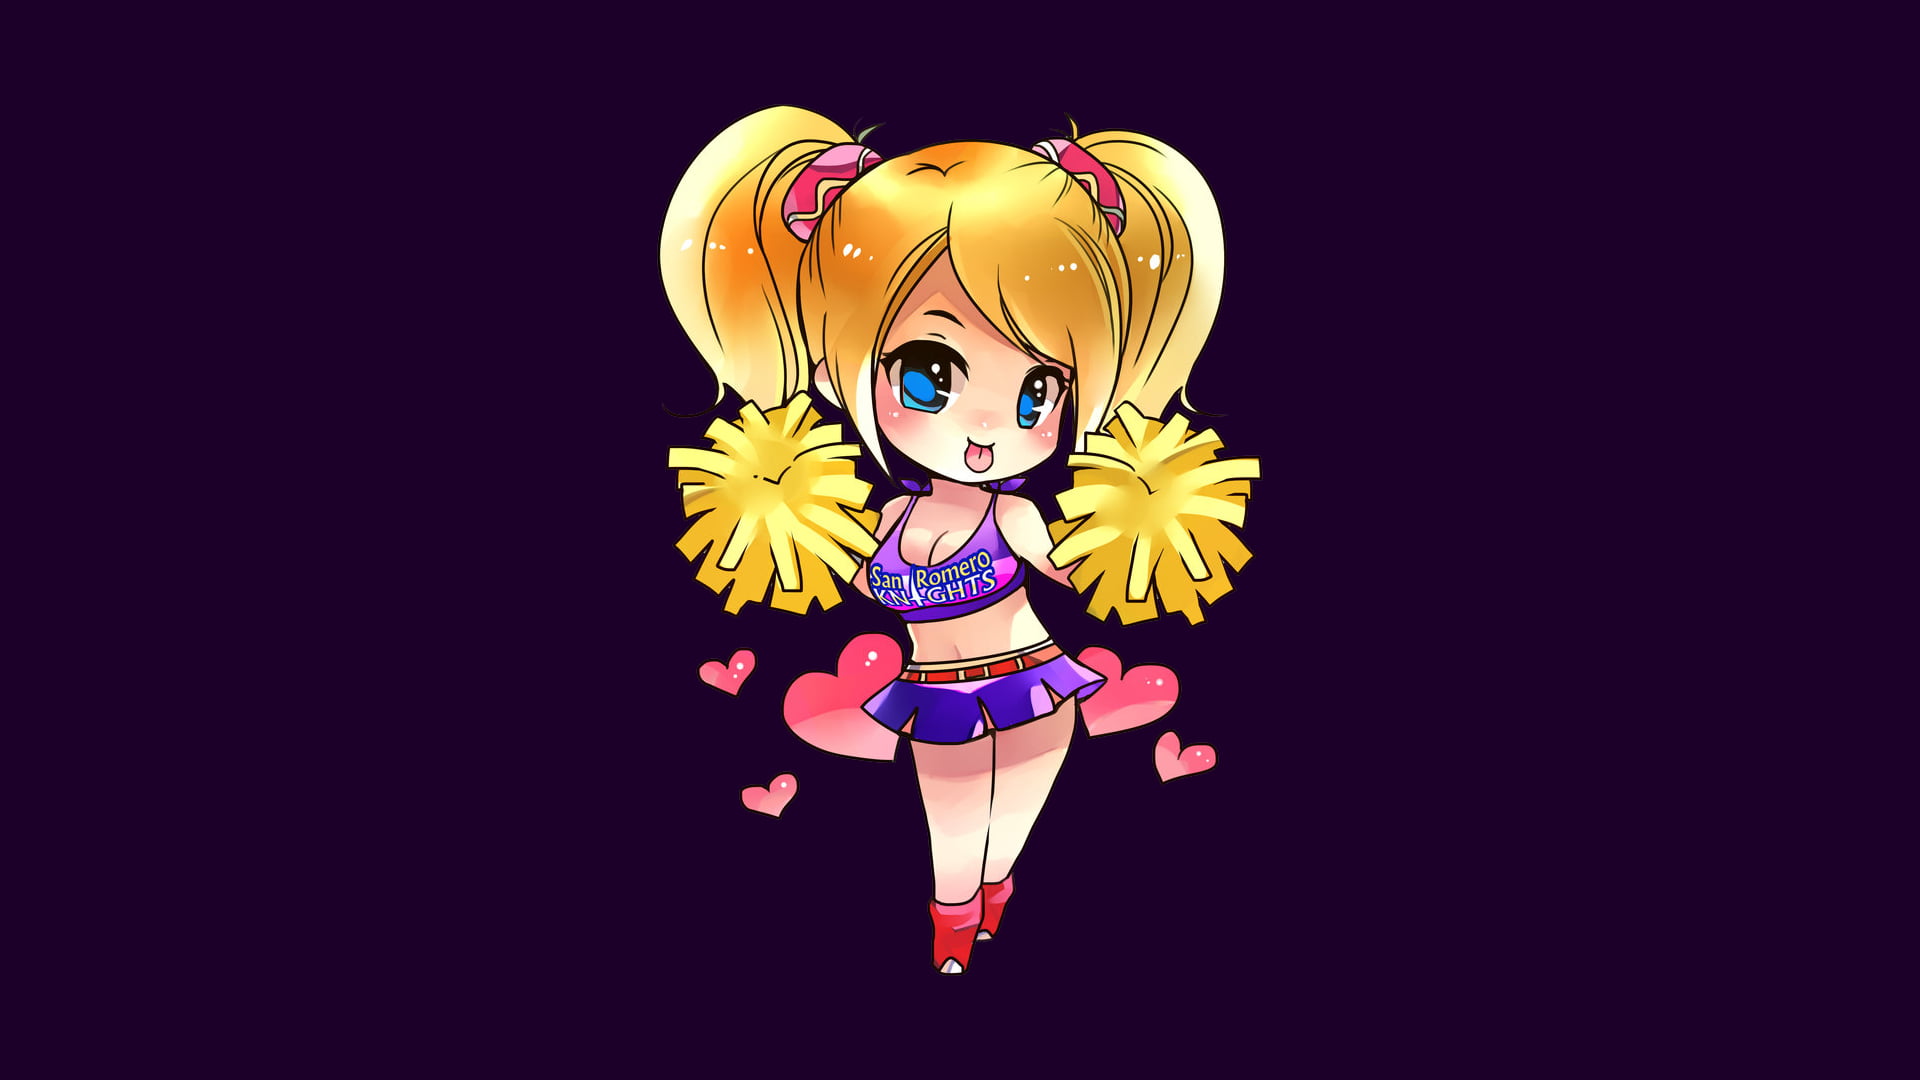 Female Anime Character Lollipop Chainsaw Juliet Starling Chibi Images, Photos, Reviews